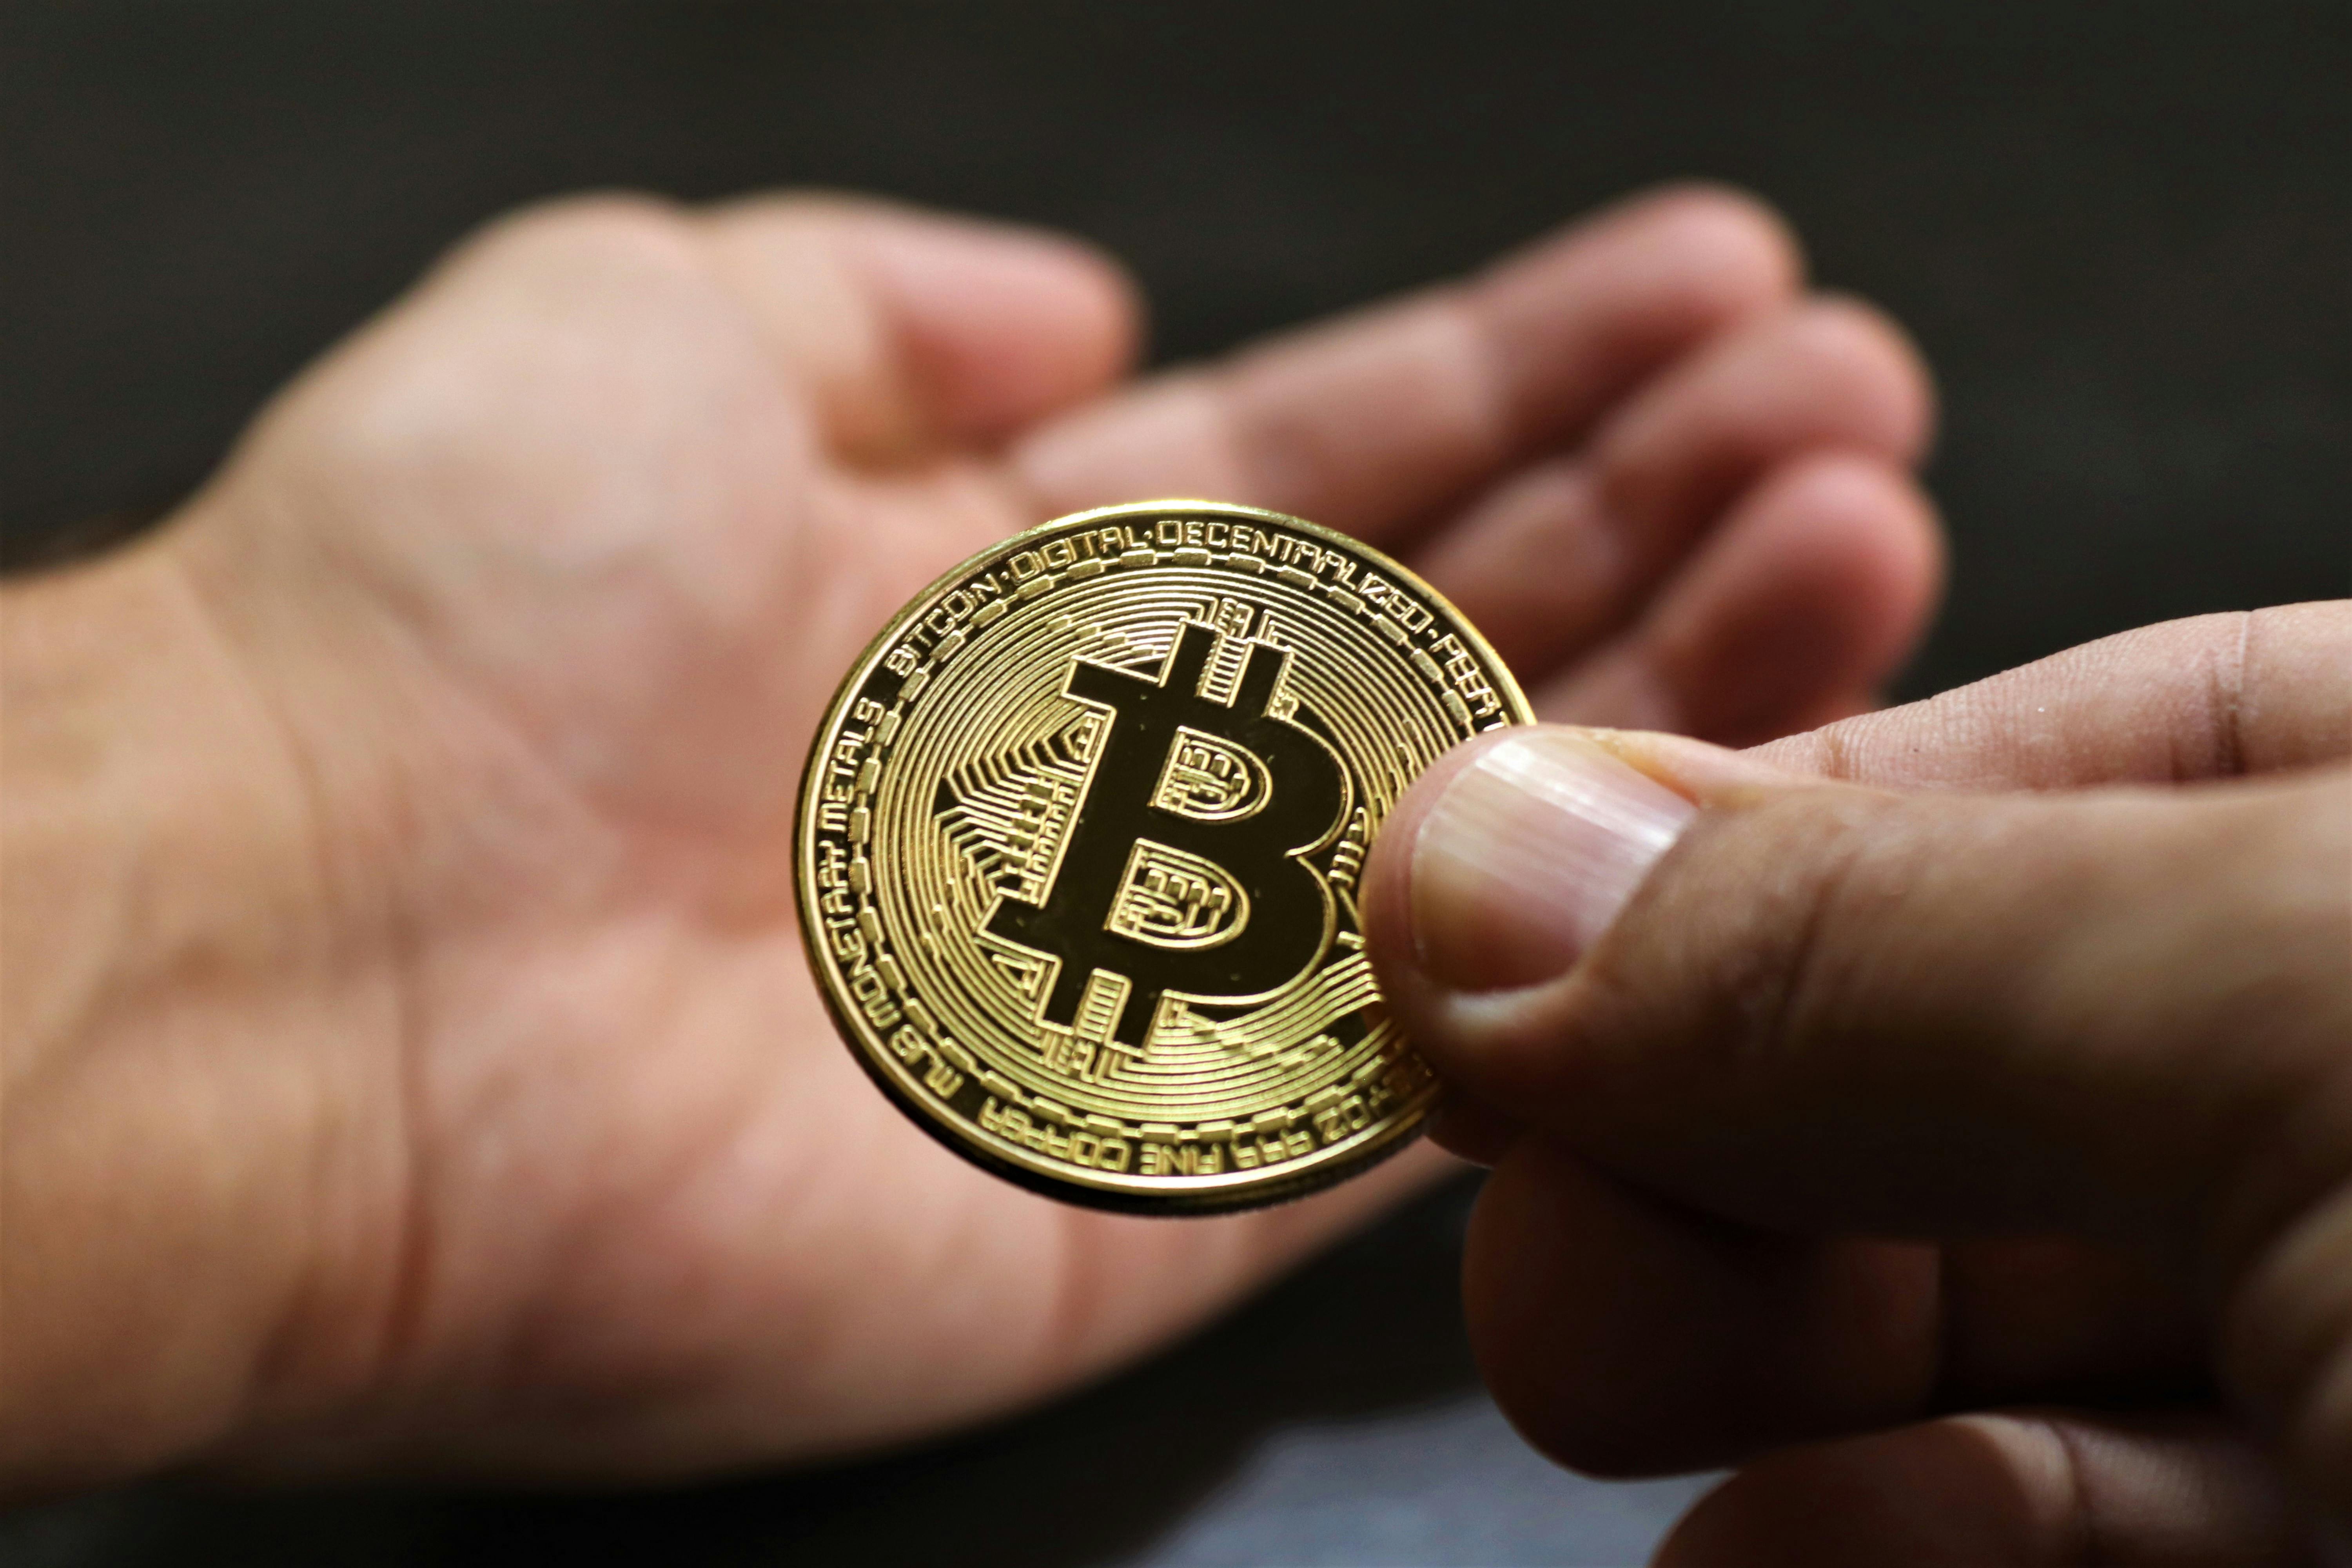 Veteran Trader Champions Bitcoin, Says US Dollar ‘Is Being Destroyed’